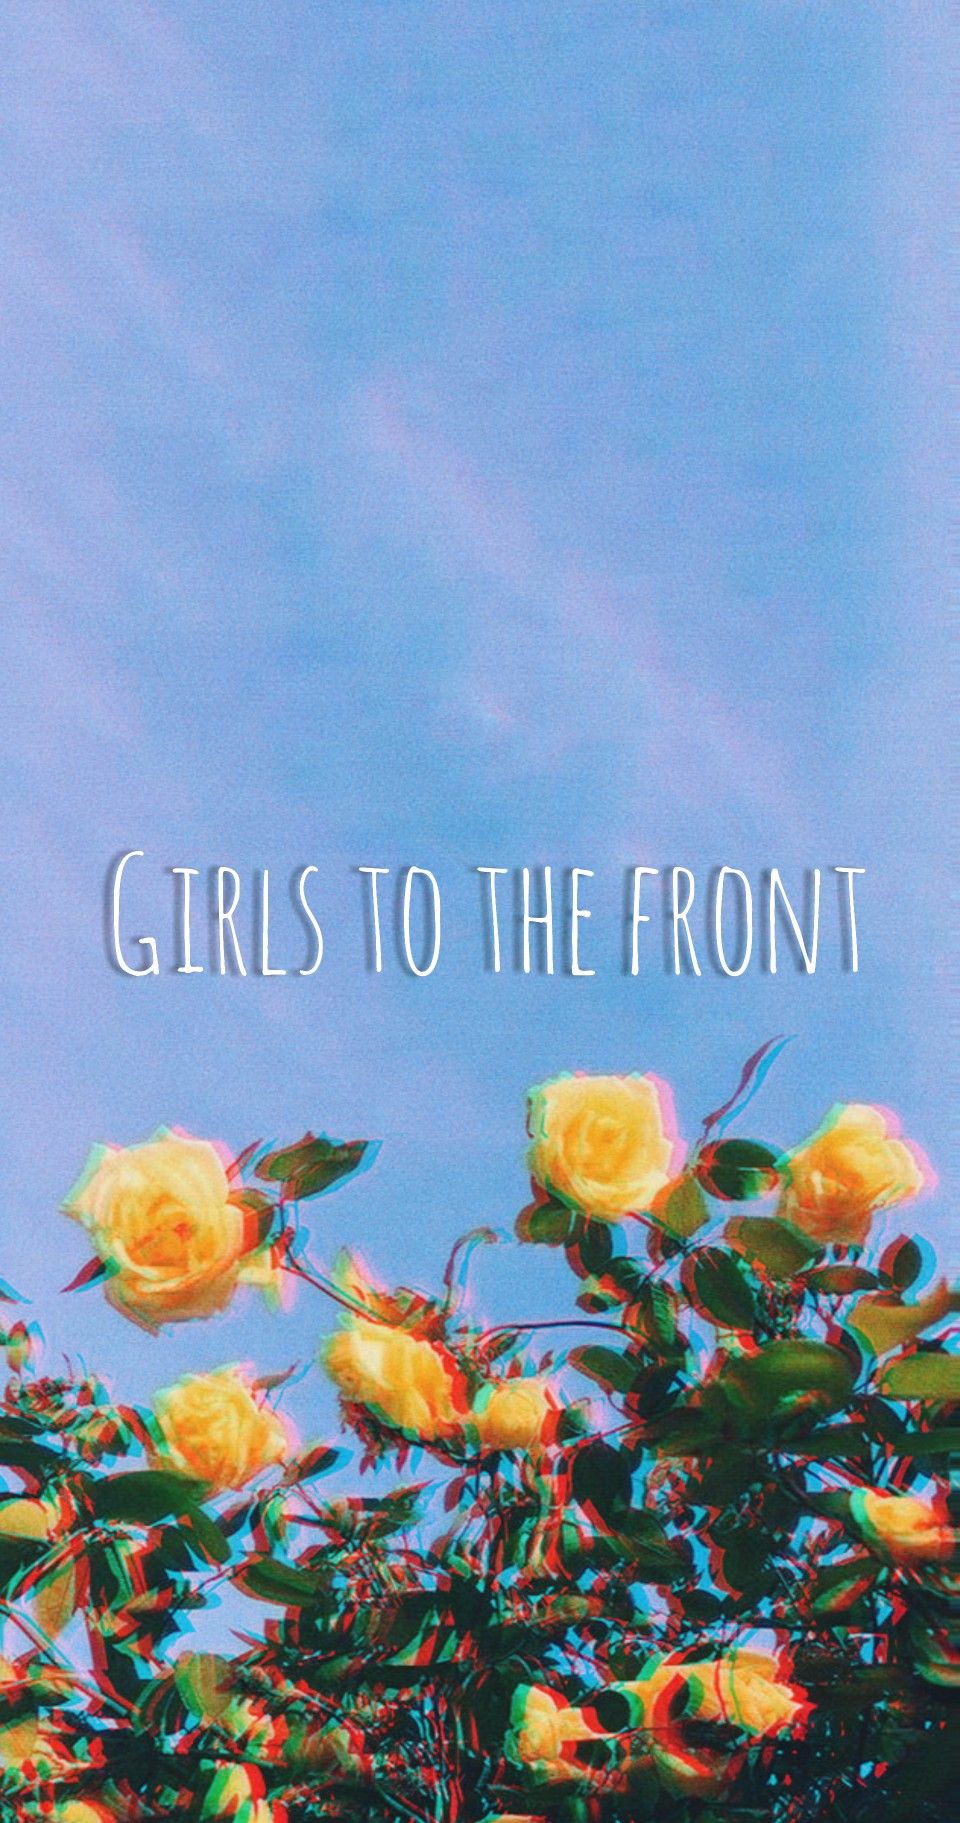 ❤girls to the front❤ // created using inshot